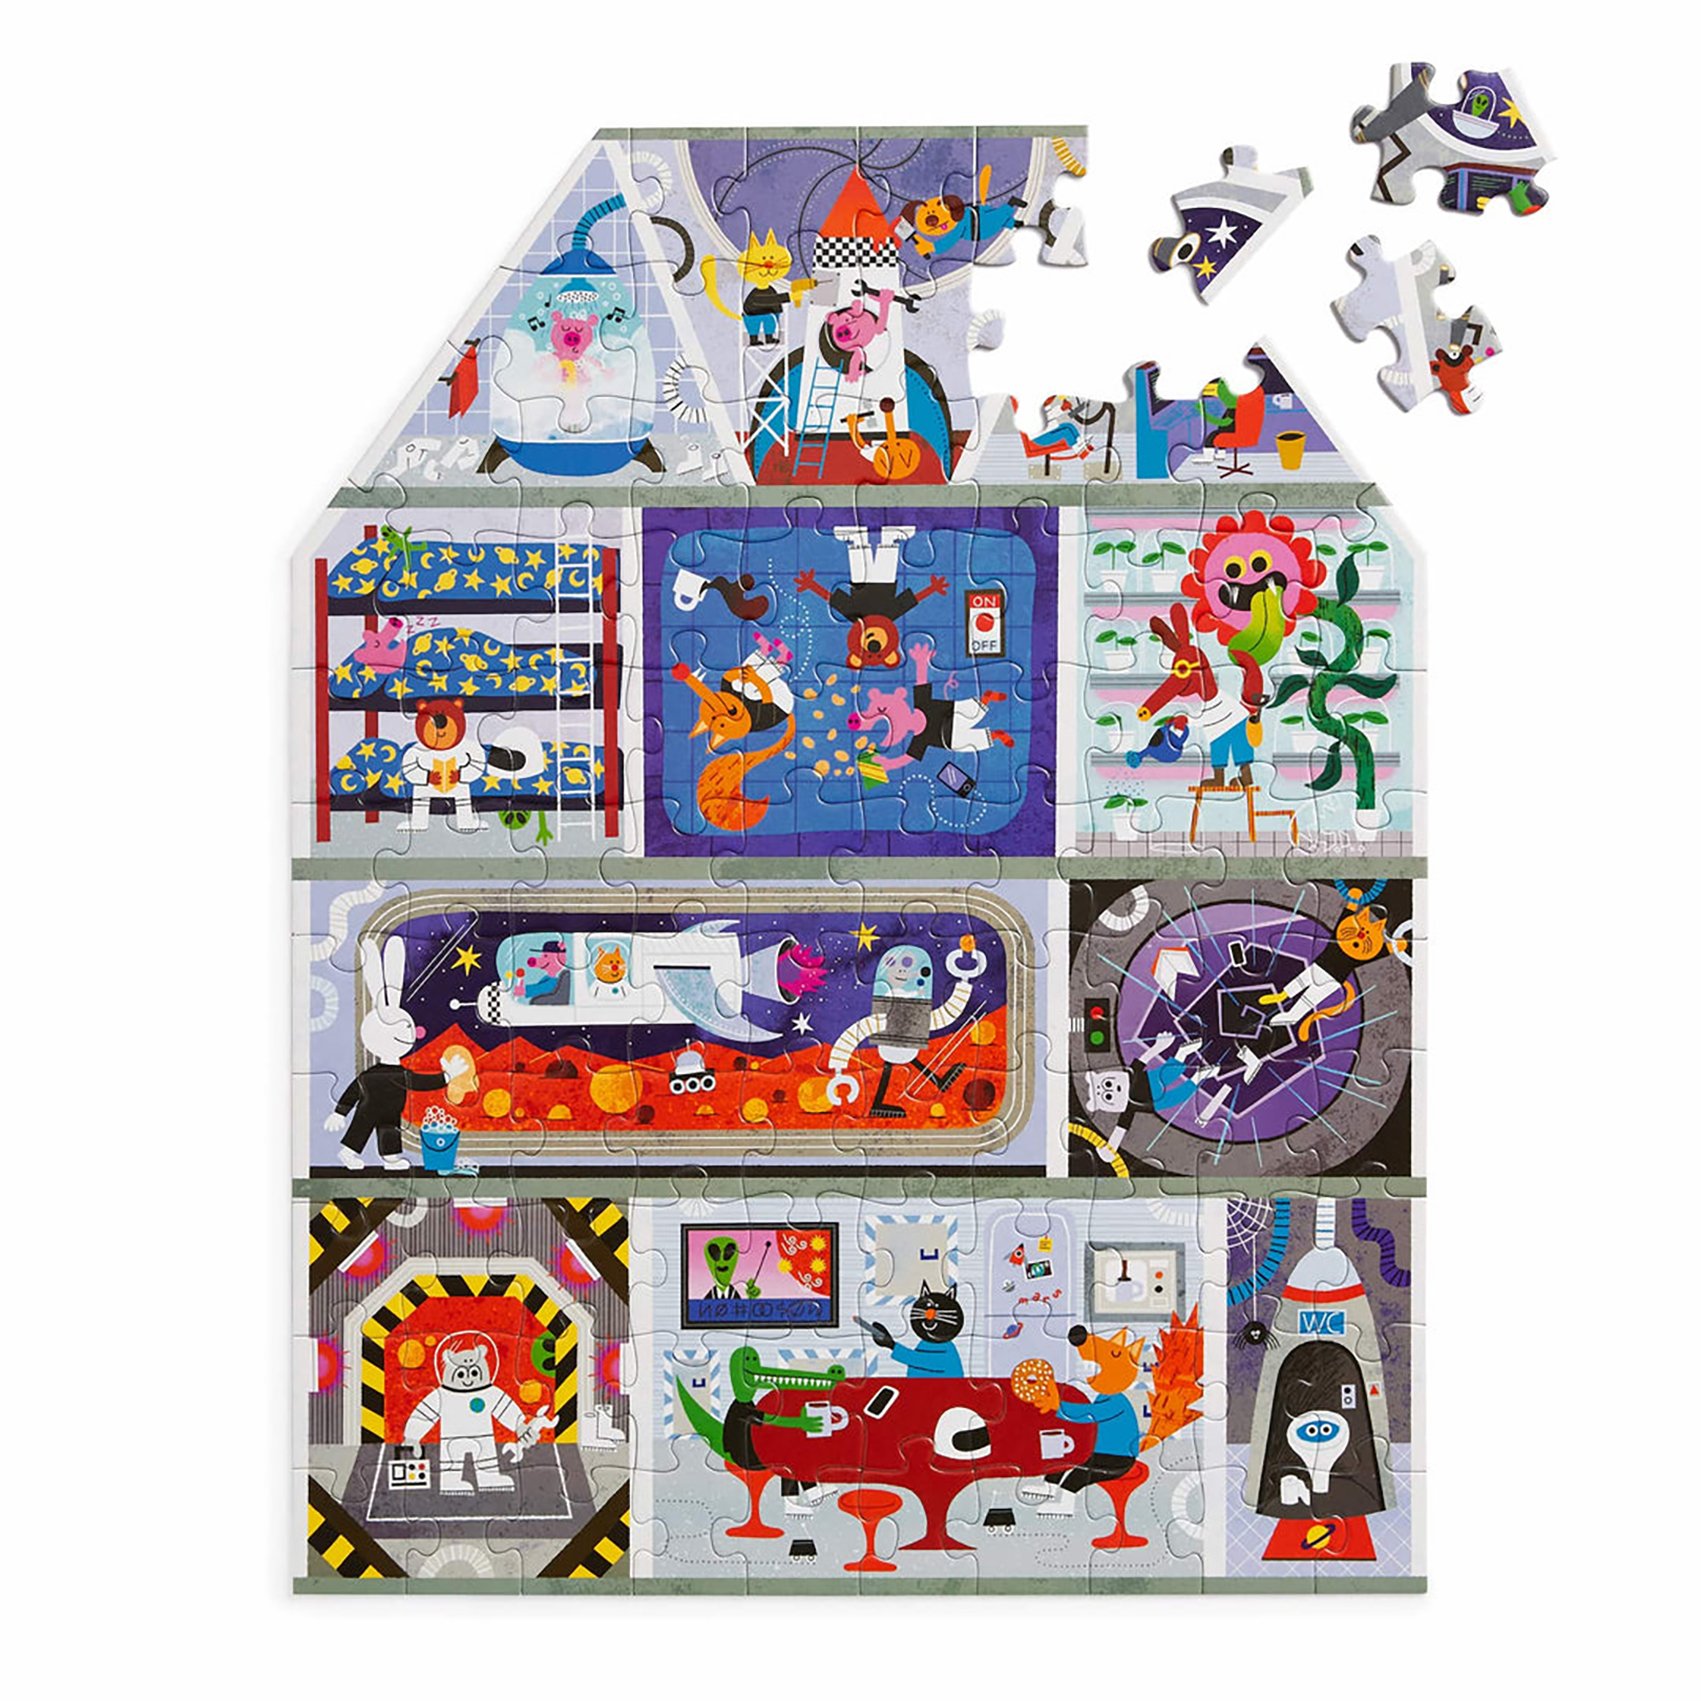 house-on-mars-100-piece-house-shaped-puzzle-9780735376823-638195_1080x.jpg